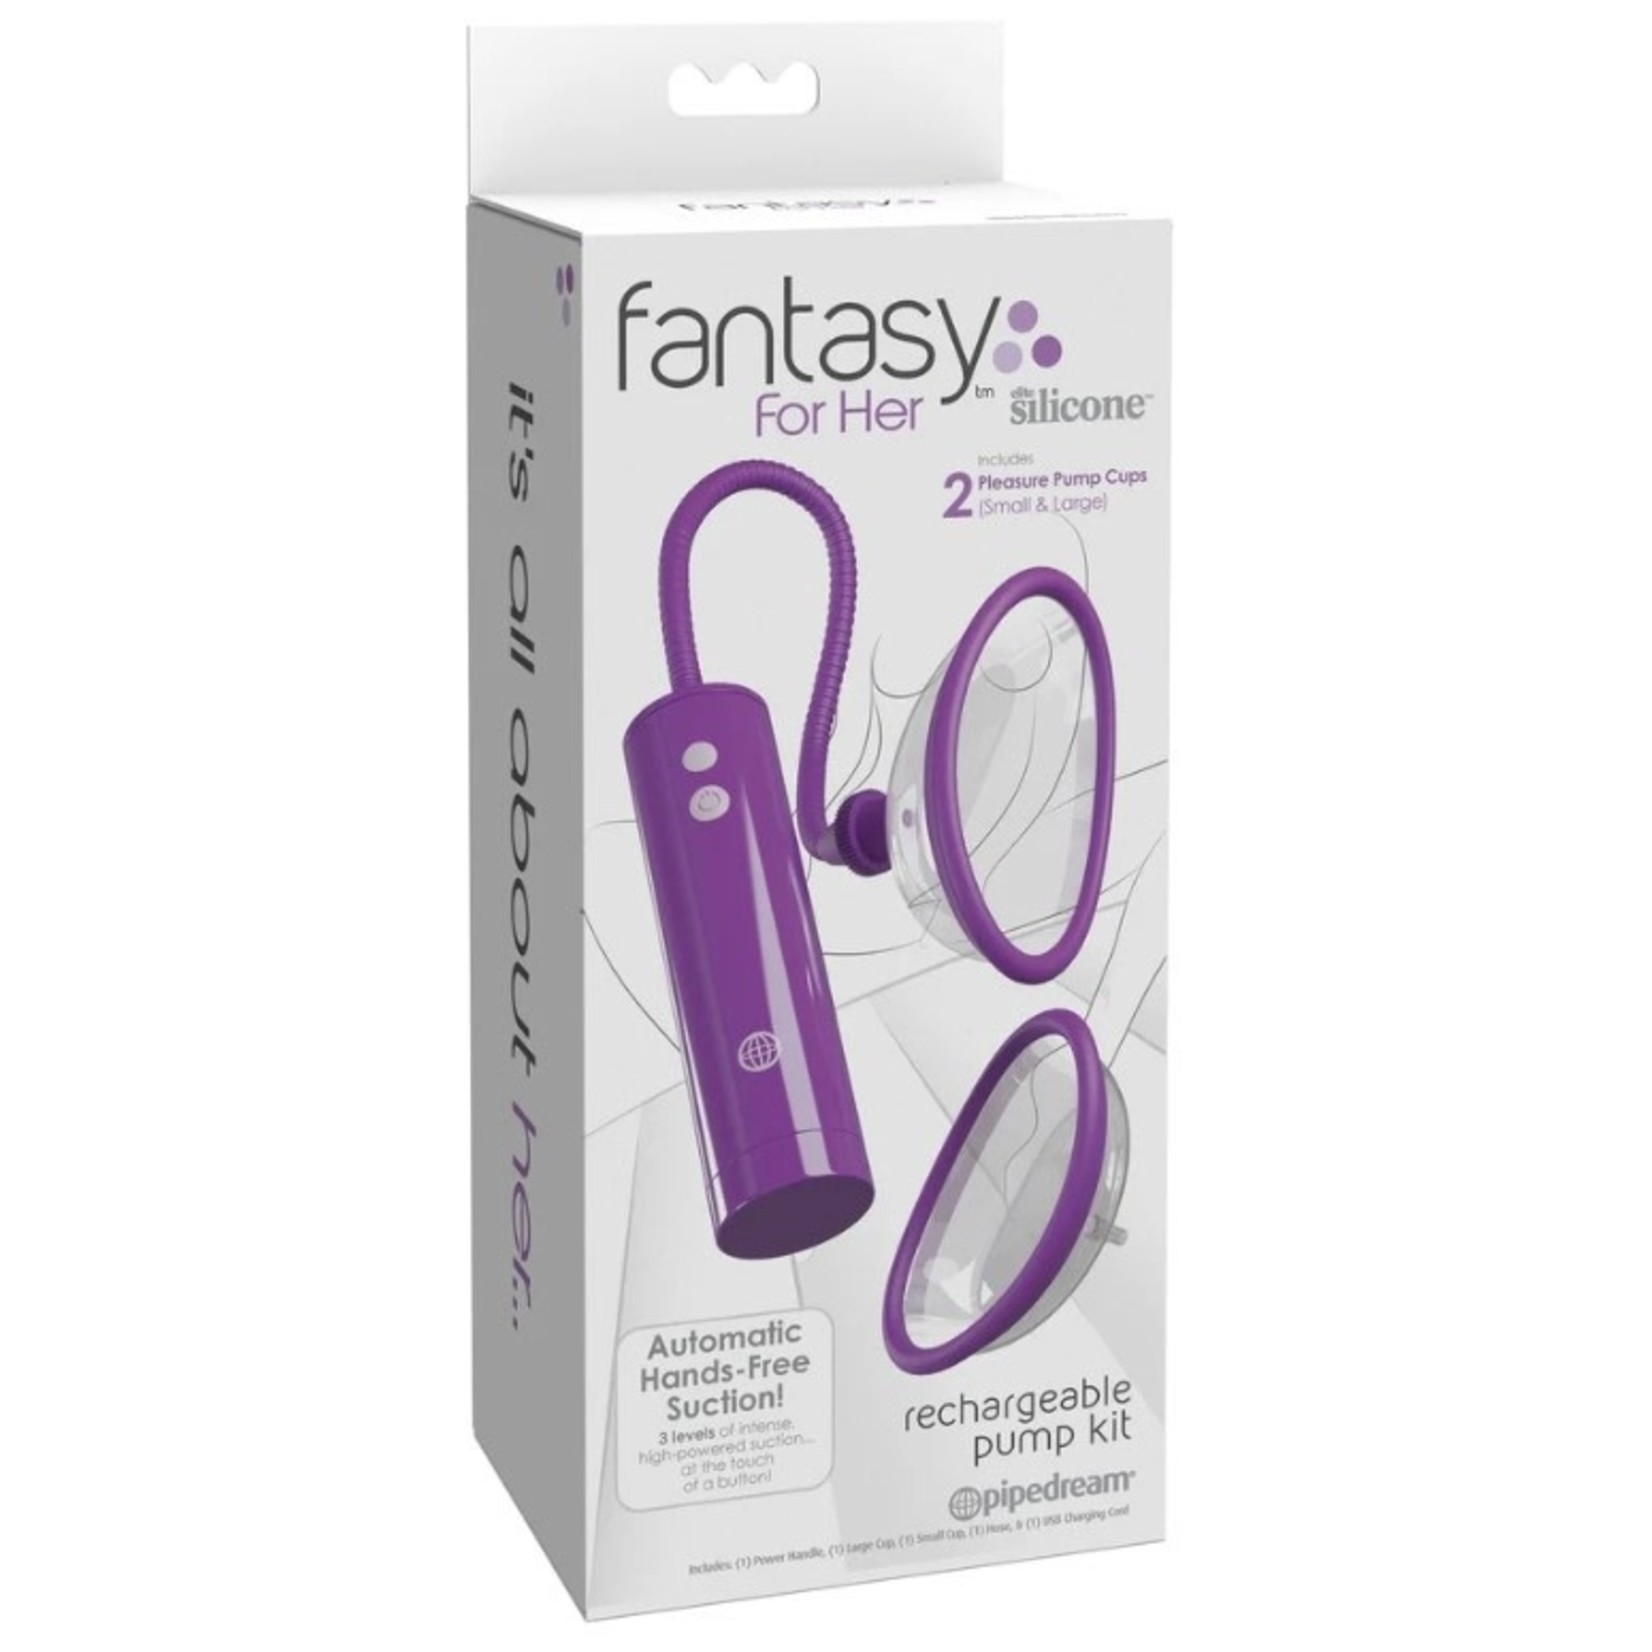 FANTASY FOR HER FANTASY FOR HER RECHARGEABLE PLEASURE PUMP KIT